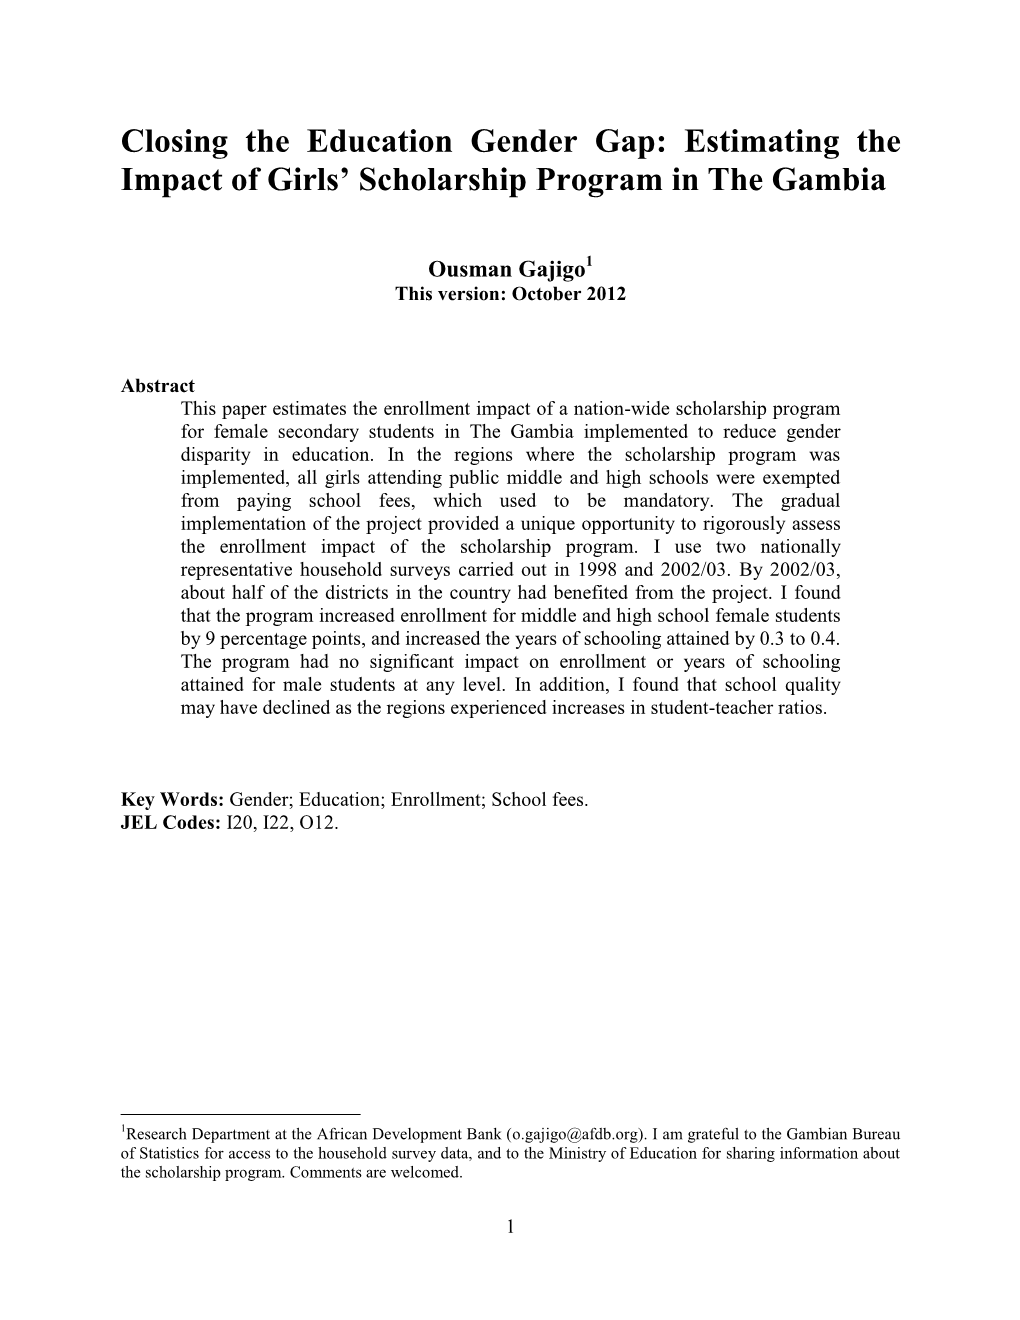 Estimating the Impact of Girls' Scholarship Program in the Gambia